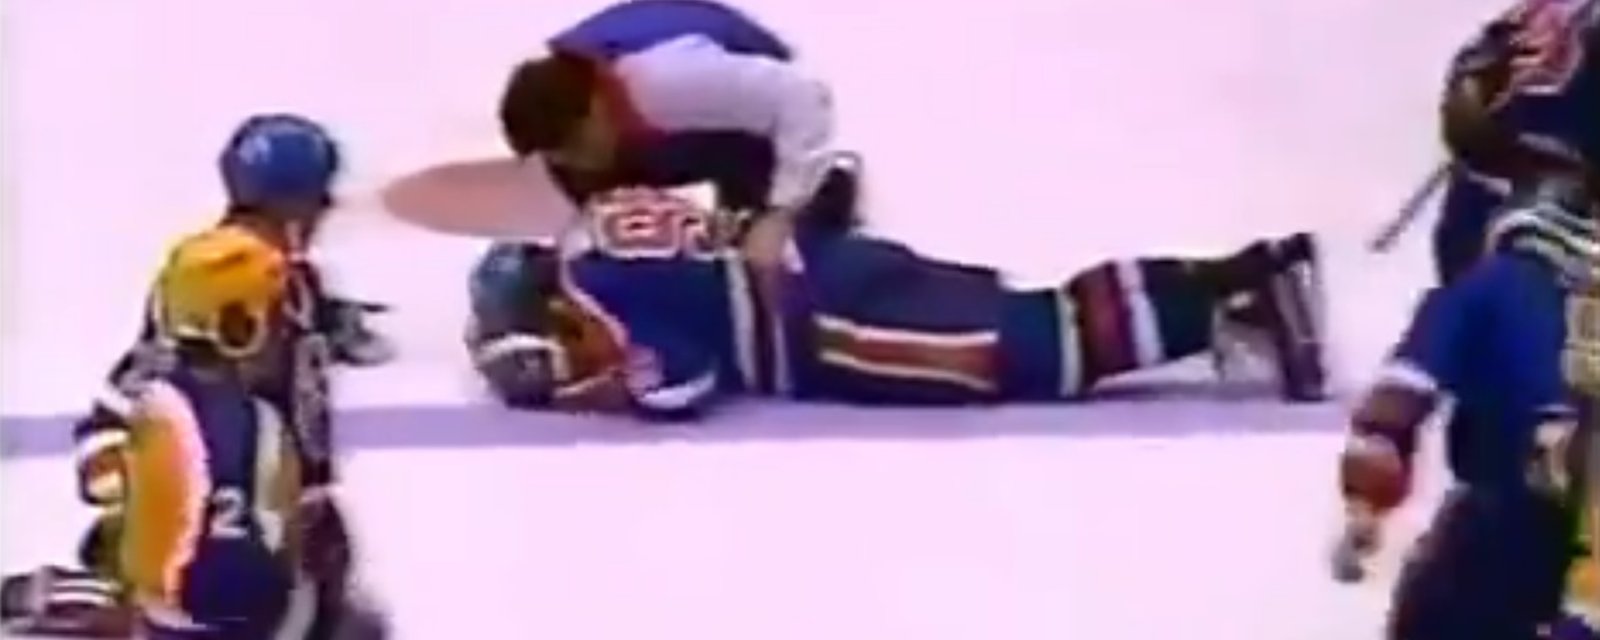 Throwback: Dave Taylor drops Wayne Gretzky with one punch in November of 1985.